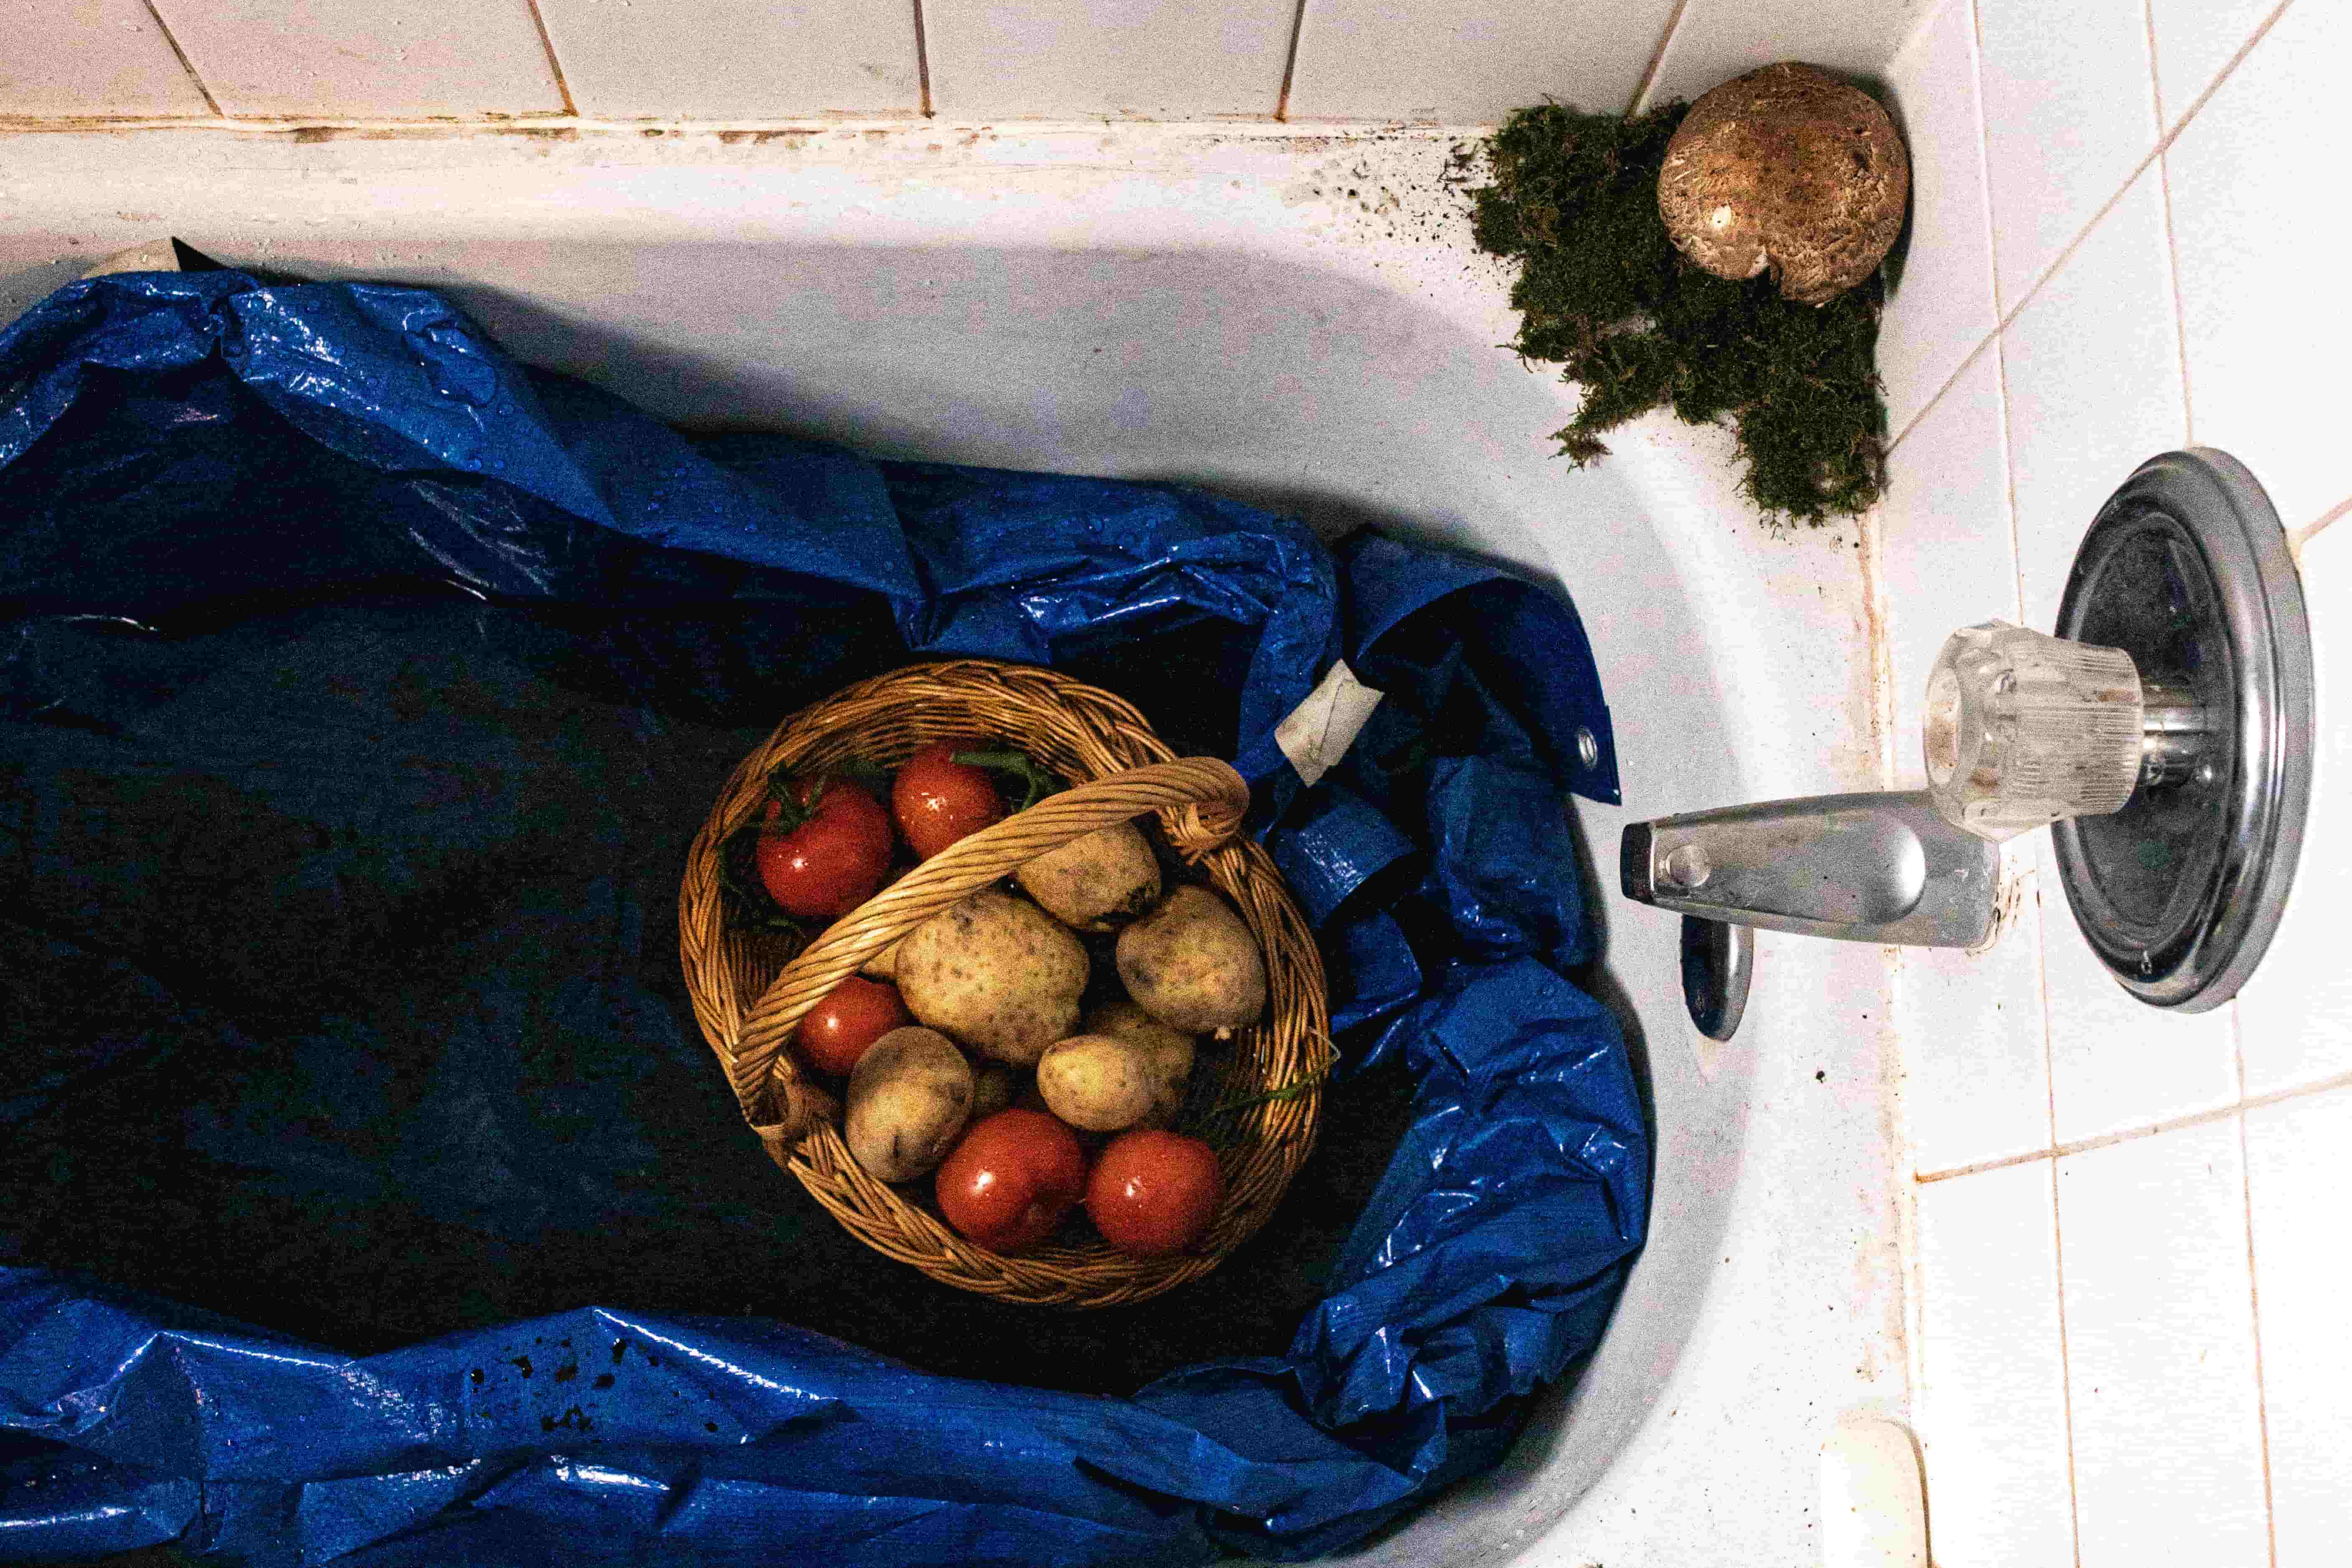 A blue tarp lines the bathtub so that the farmer can clean his newly harvested crops